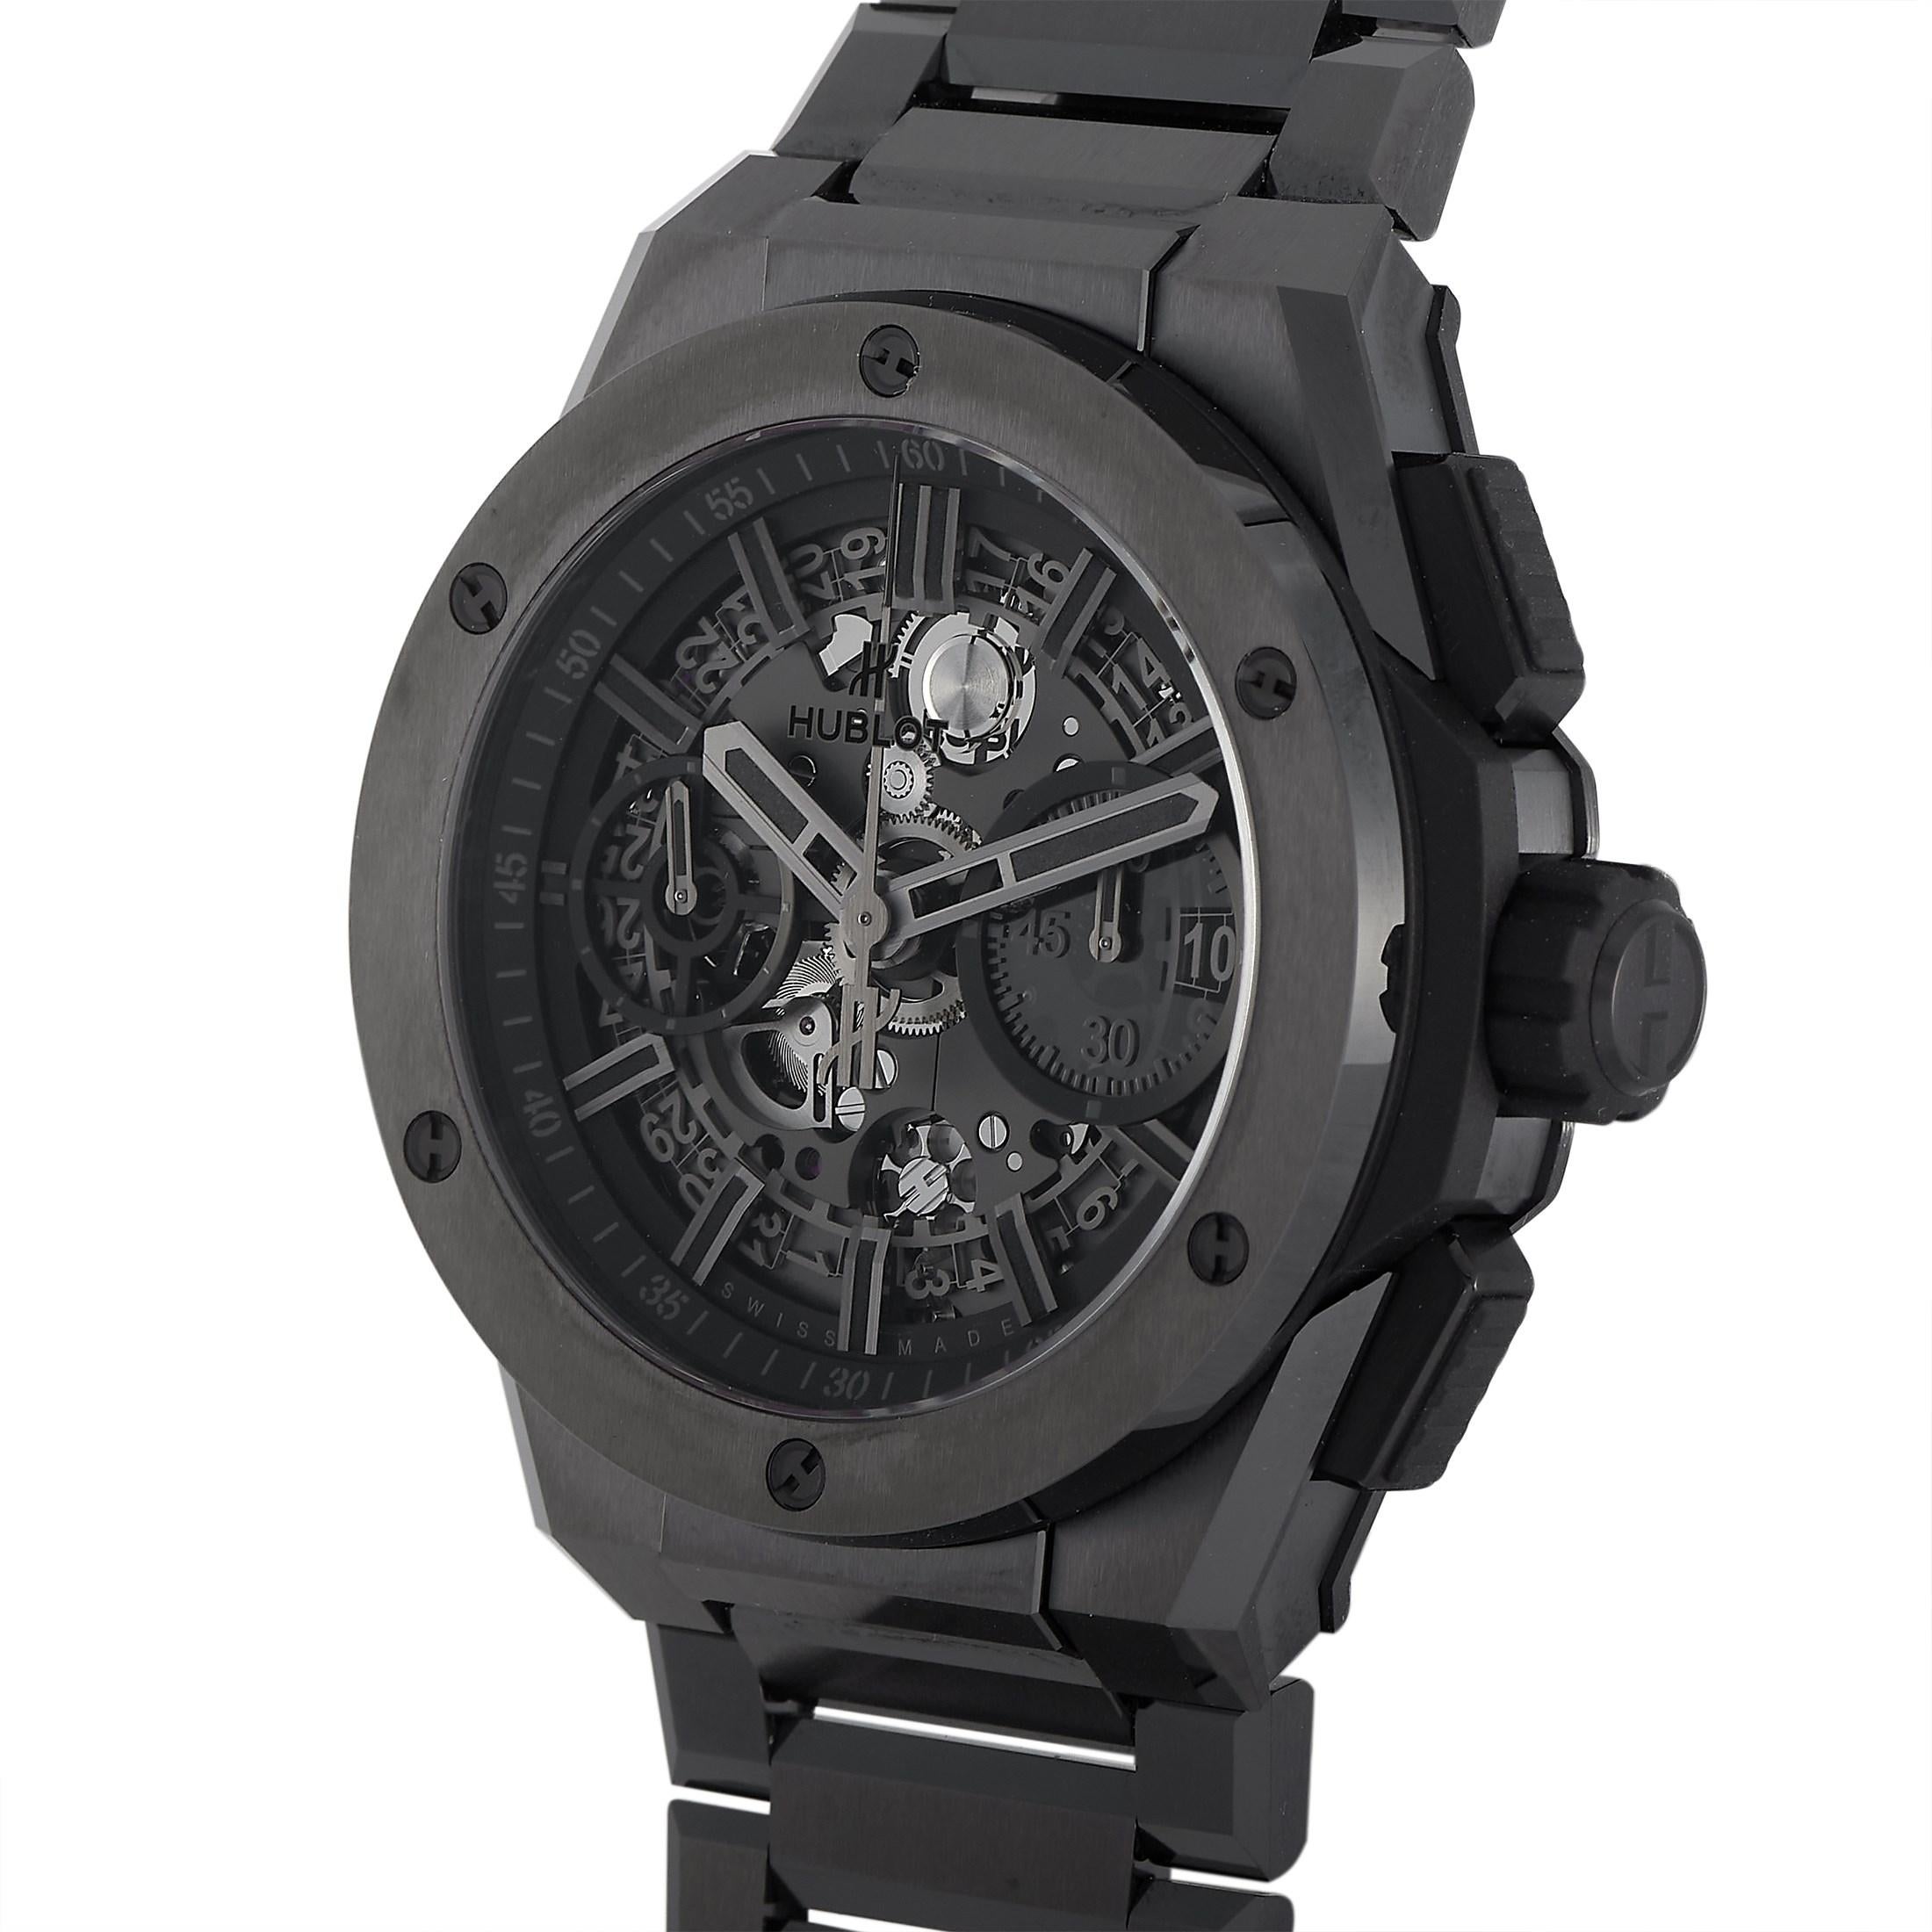 The Hublot Big Bang Integral Watch, reference number 451.CX.1140.CX, is a contemporary take on a classic timepiece. 

A 42mm case, bezel, and bracelet crafted from black ceramic provides the perfect foundation for this bold, stylish accessory. But